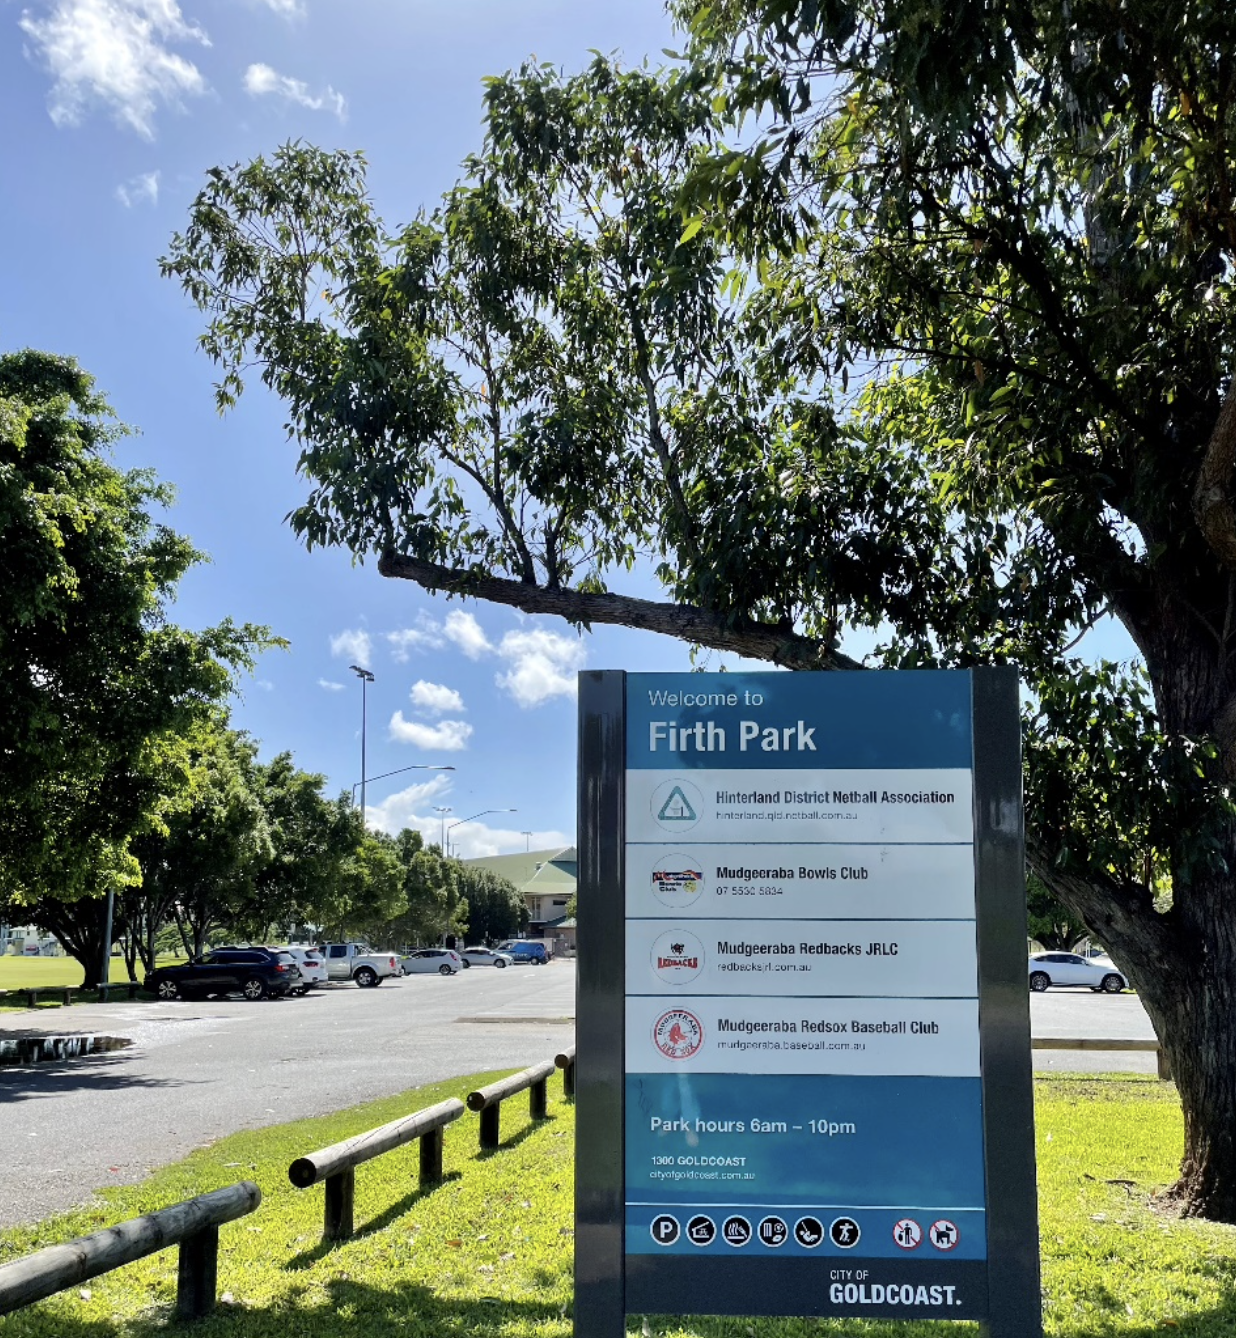 A blue sign on grass reading "Welcome to Firth Park" and displaying information